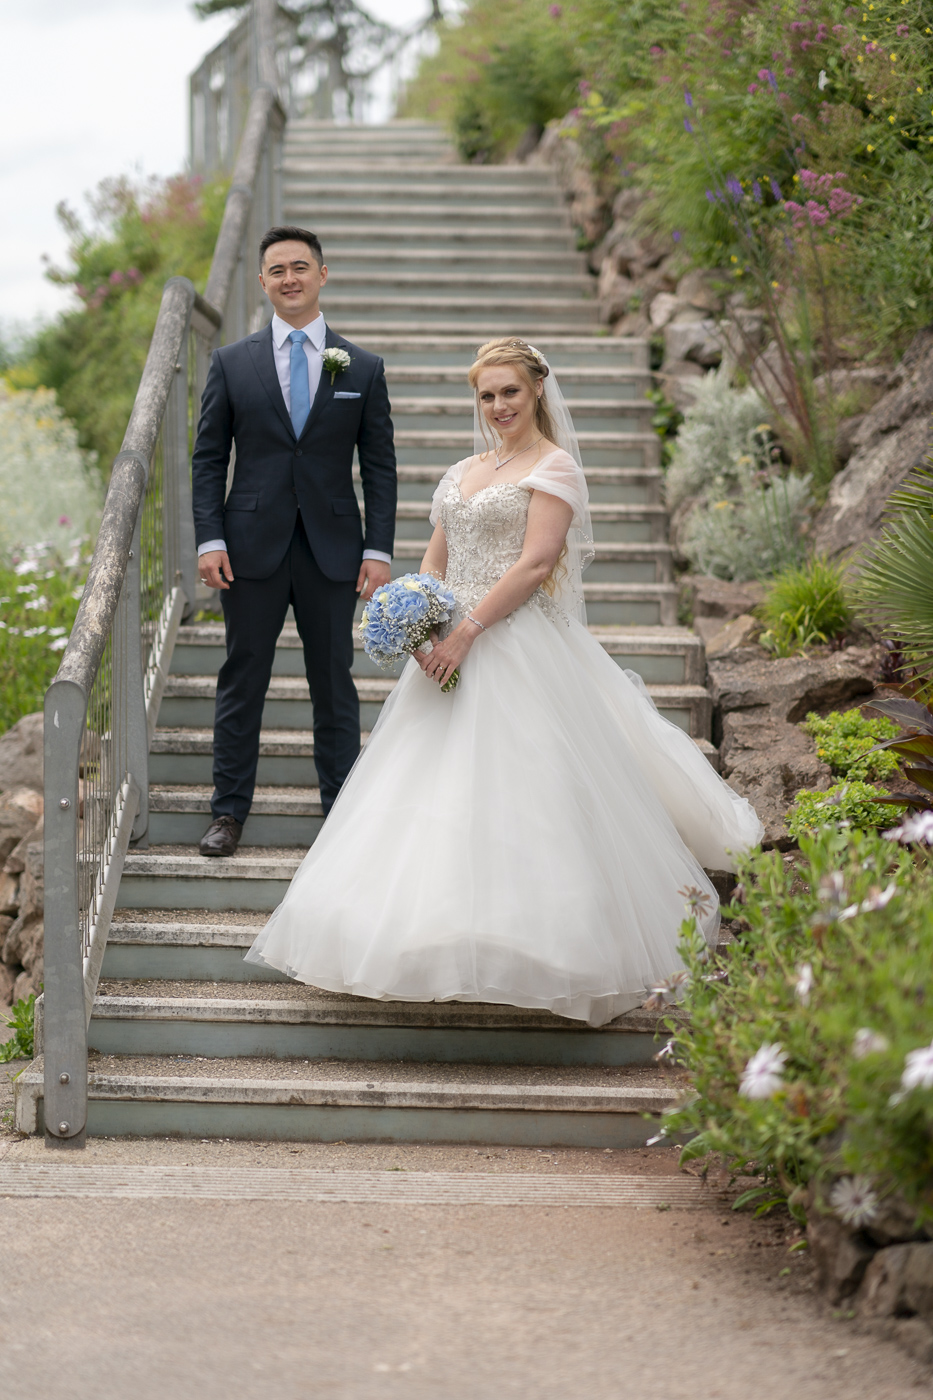 Bride and Groom on stairs at Rock walk in Torquay, Devon.